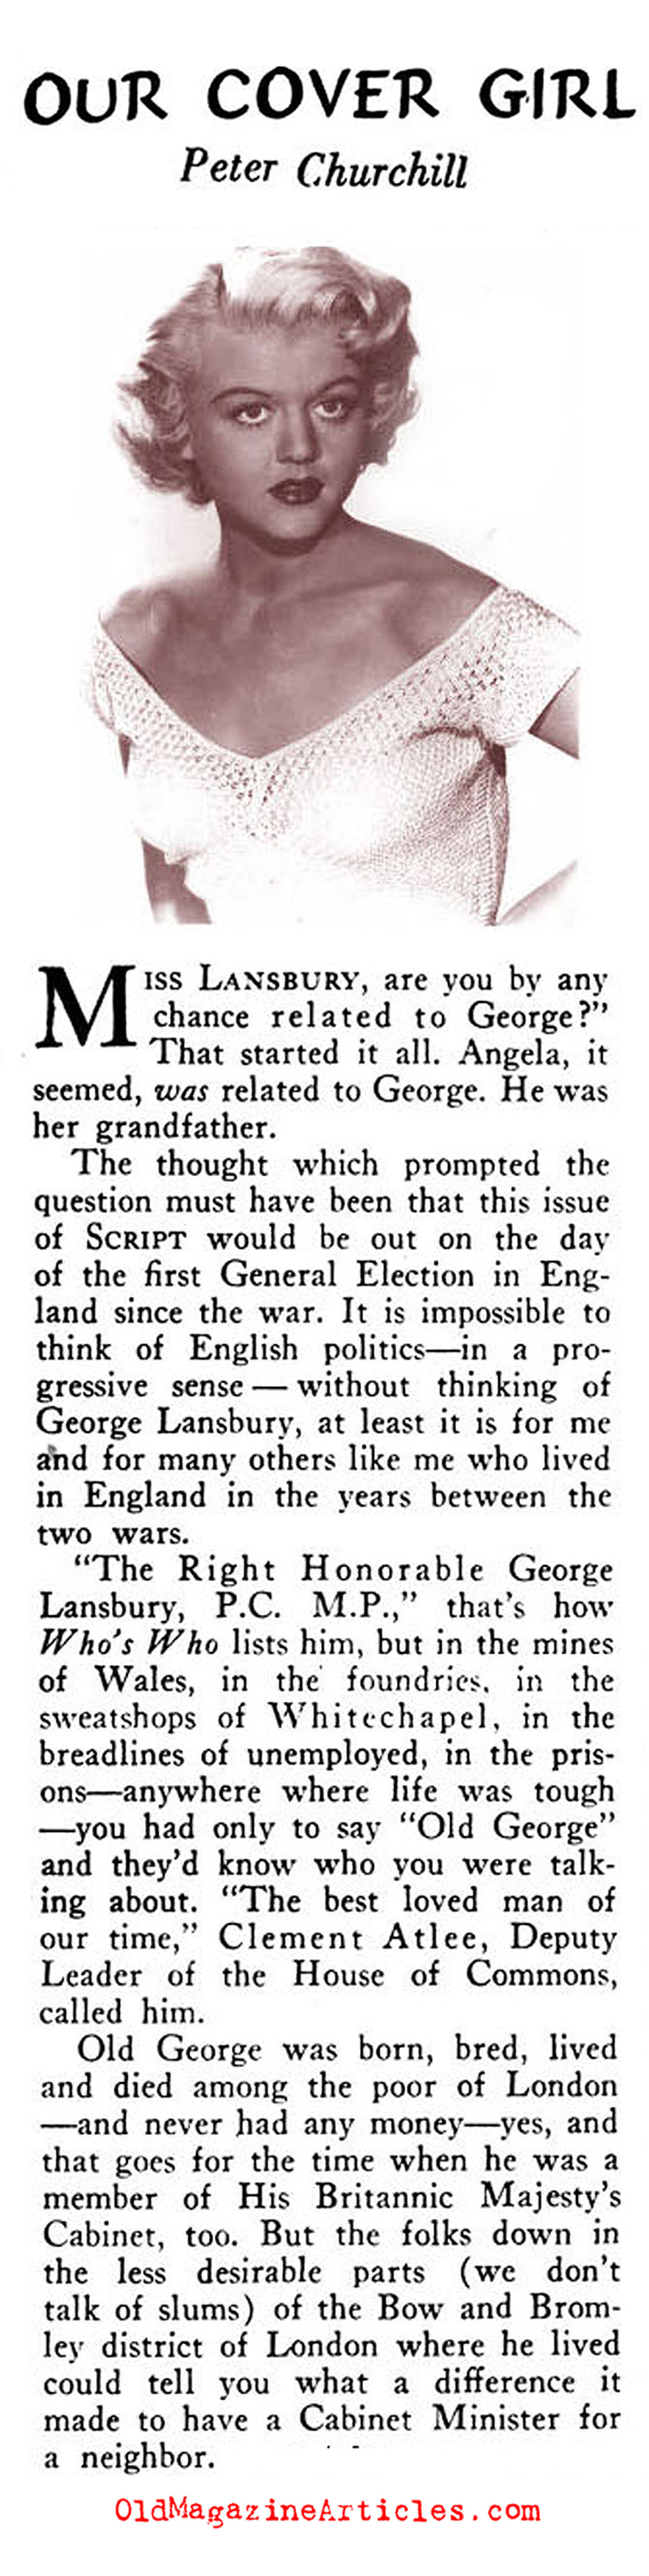 A Profile of George Lansbury (Rob Wagner's Script Magazine, 1945)